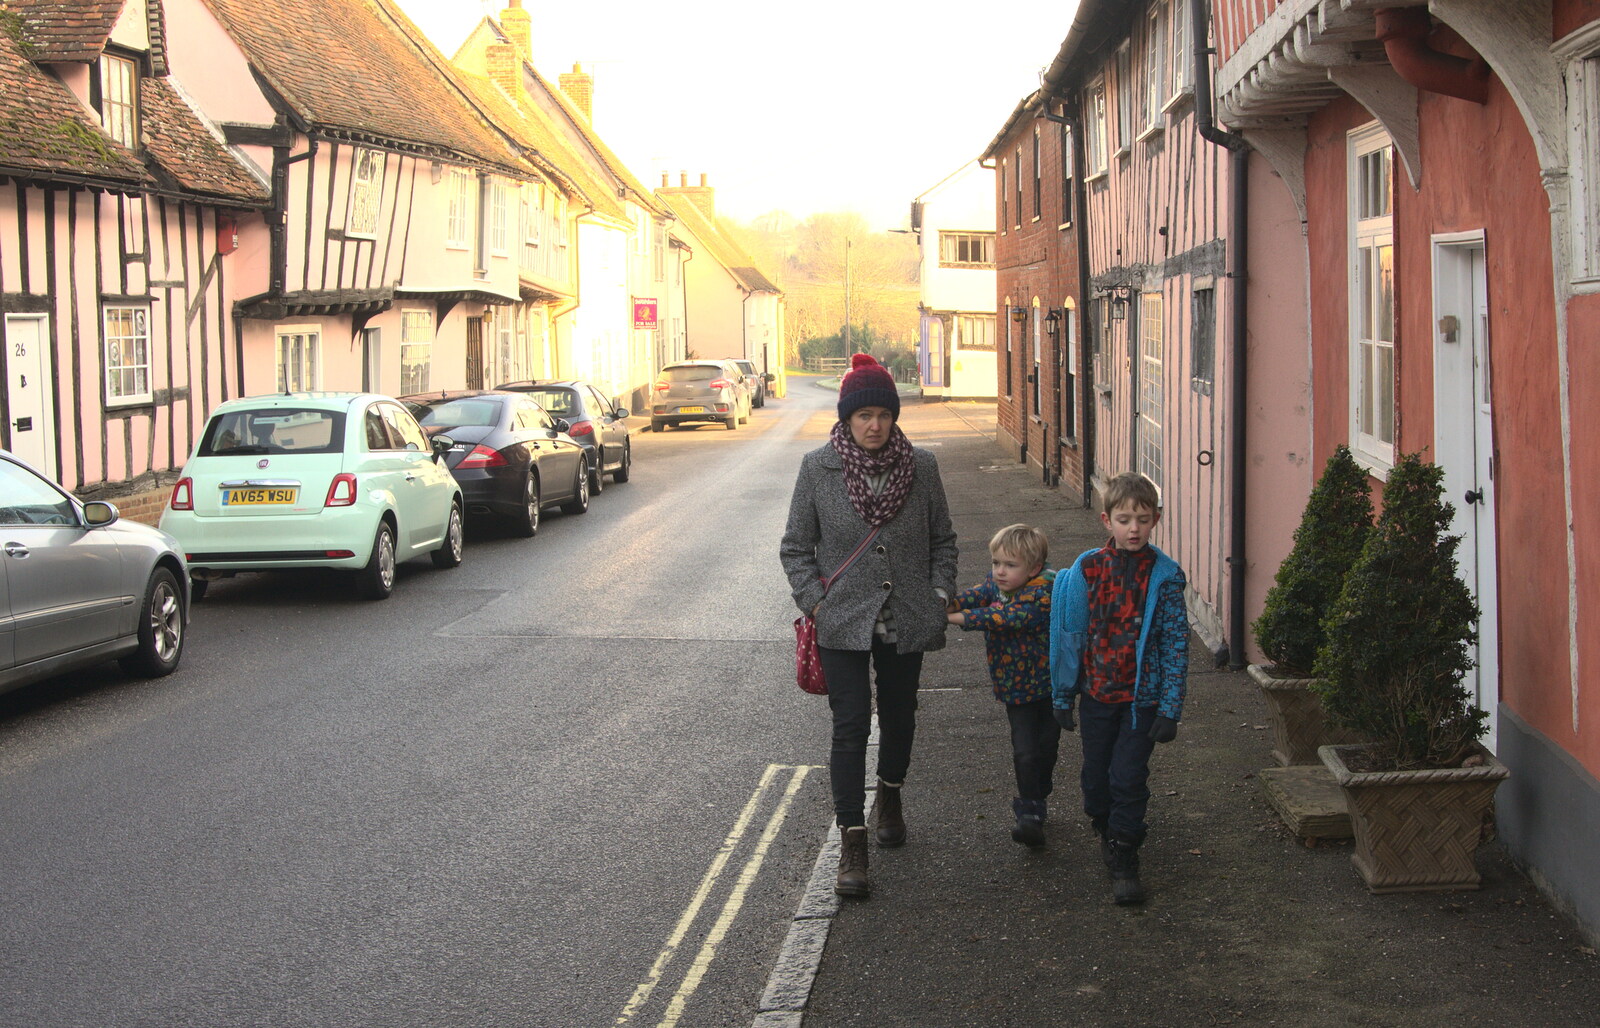 Walking back to the car from A Day in Lavenham, Suffolk - 22nd January 2017